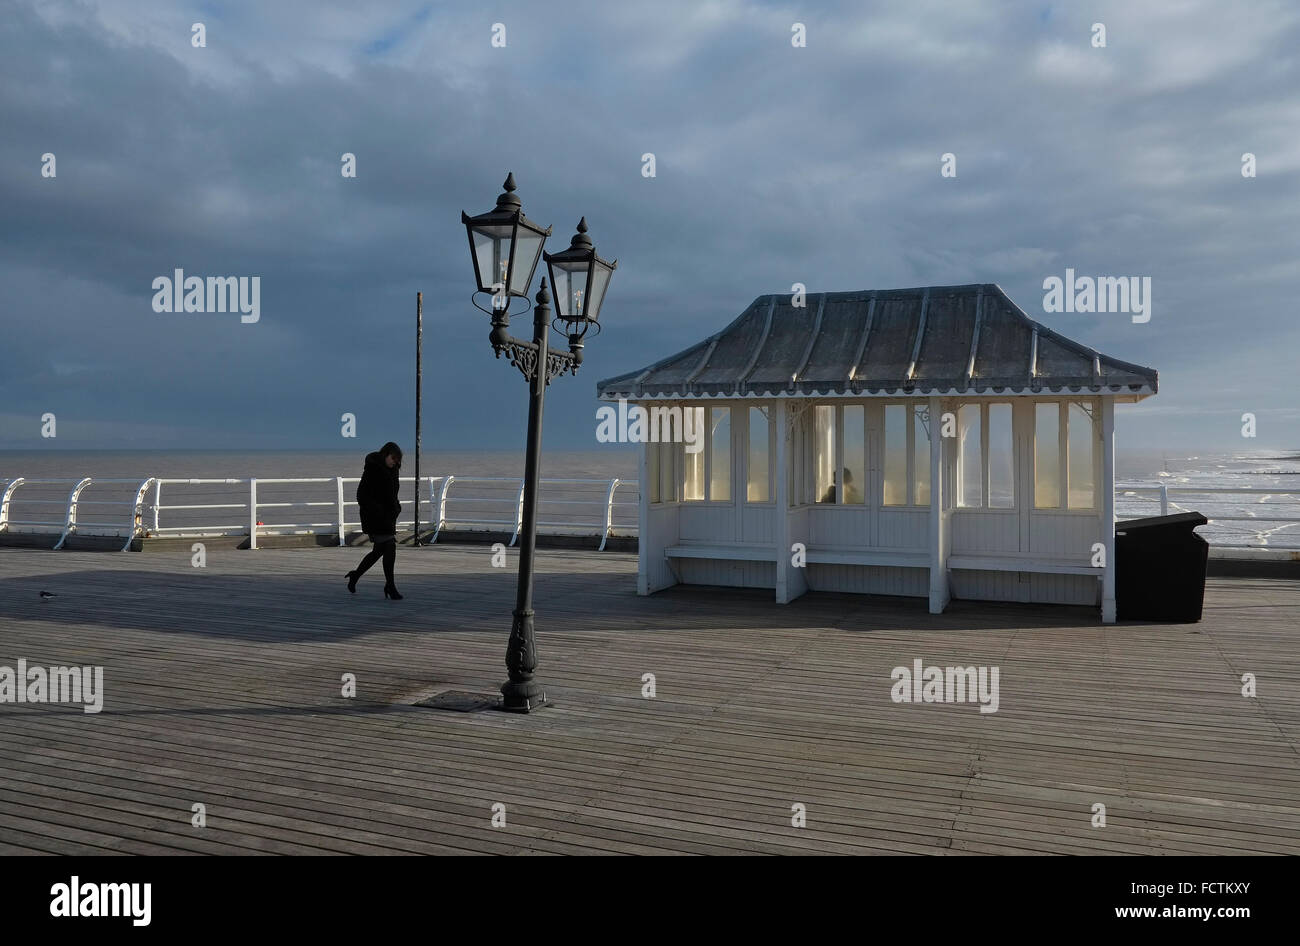 person walking in strong wind on cromer pier, north norfolk, england Stock Photo